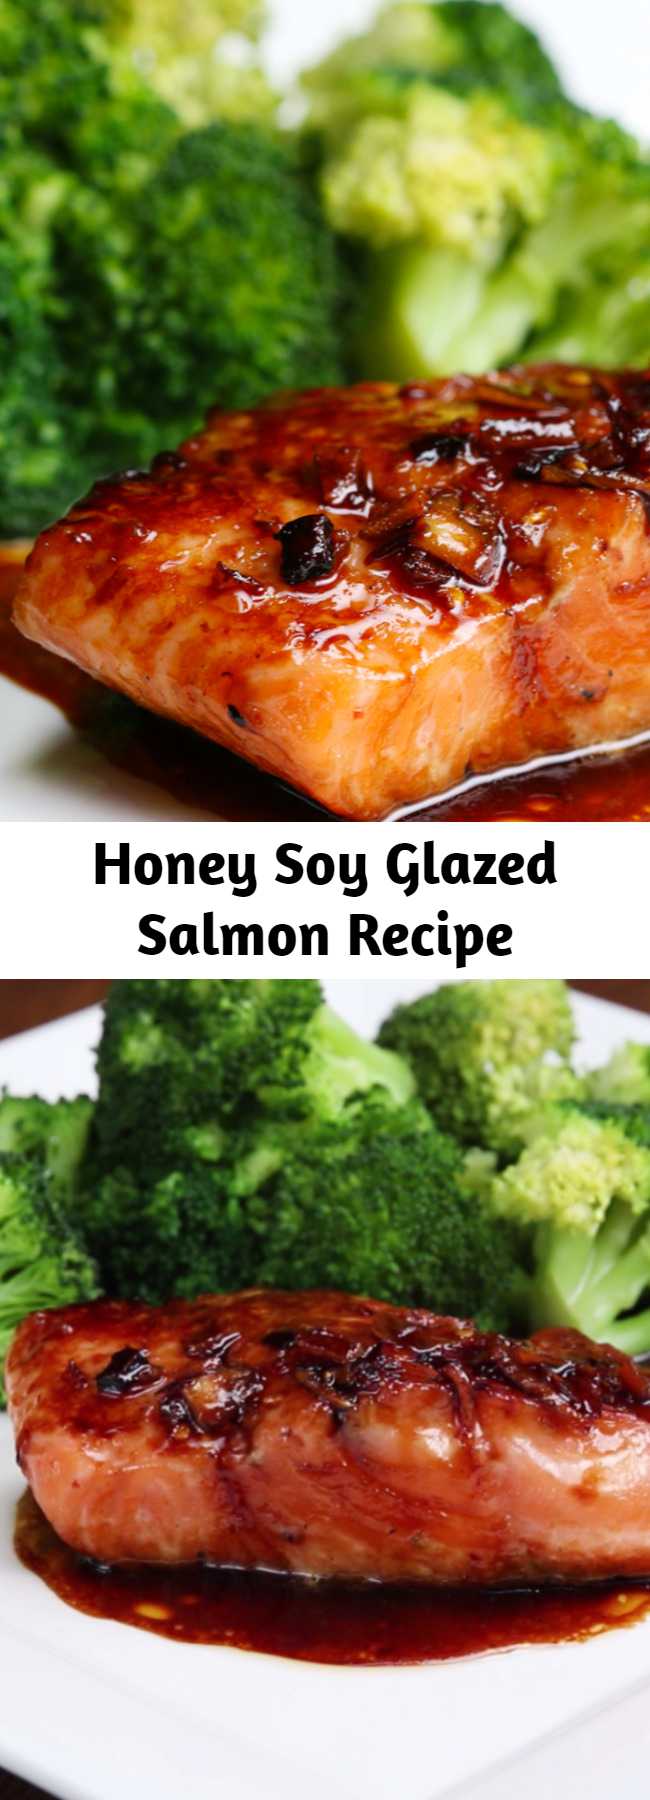 Honey Soy Glazed Salmon Recipe - Two words: honey salmon! Sure, it takes a tiny bit of prep work, but once you marinate your salmon, you won’t be able to go back.